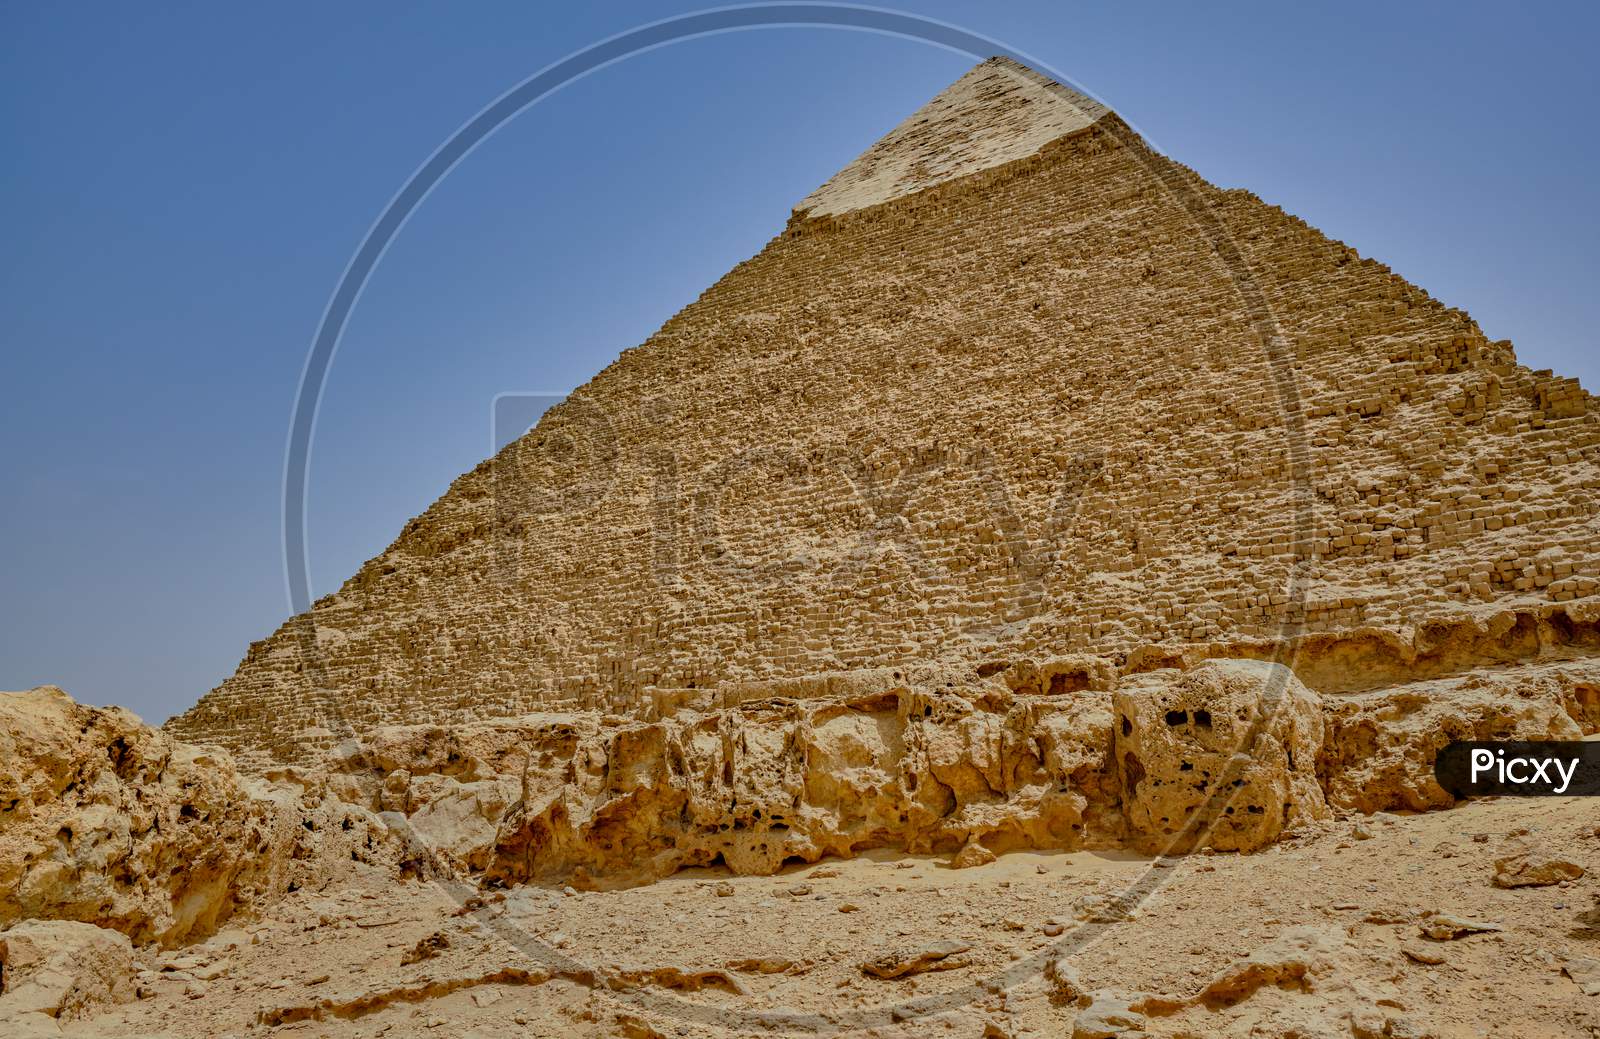 The Pyramid Of Khafre (Pyramid Of Chephren), The Second-Tallest Of The Ancient Egyptian Pyramids Of Giza, Giza Plateau, Cairo, Egypt